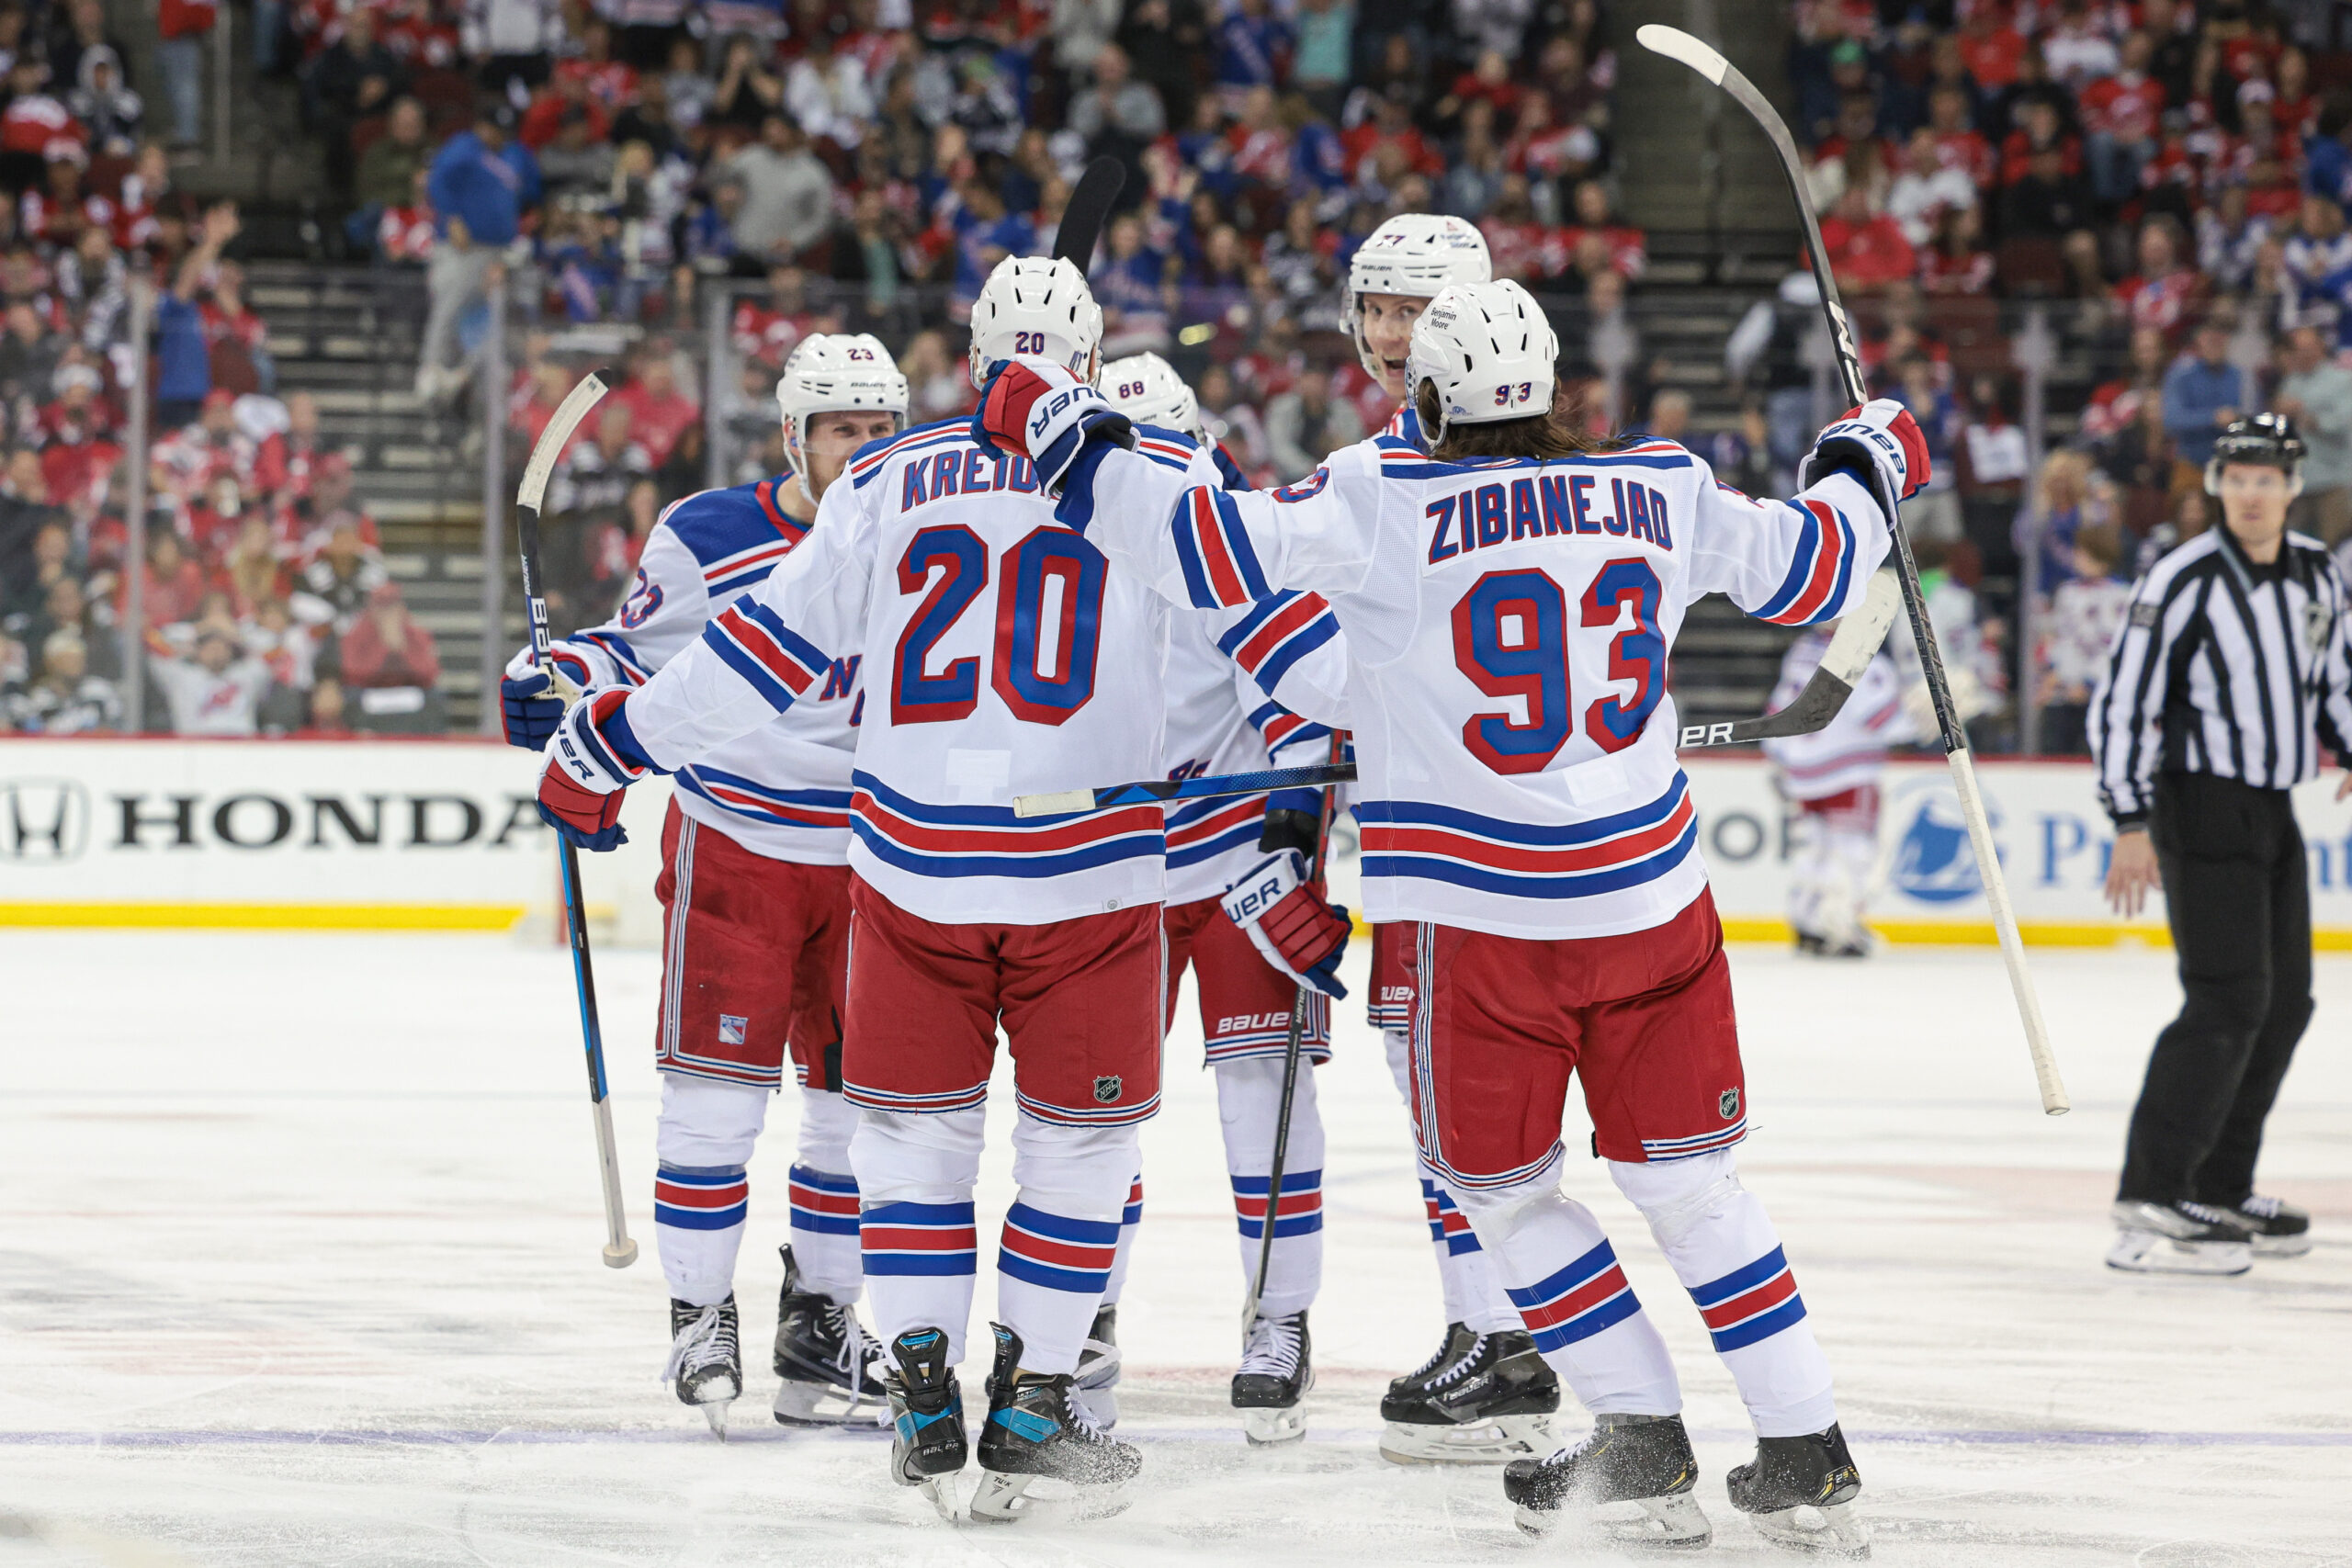 New York Rangers vs. New Jersey Devils Game 4: Time, TV channel